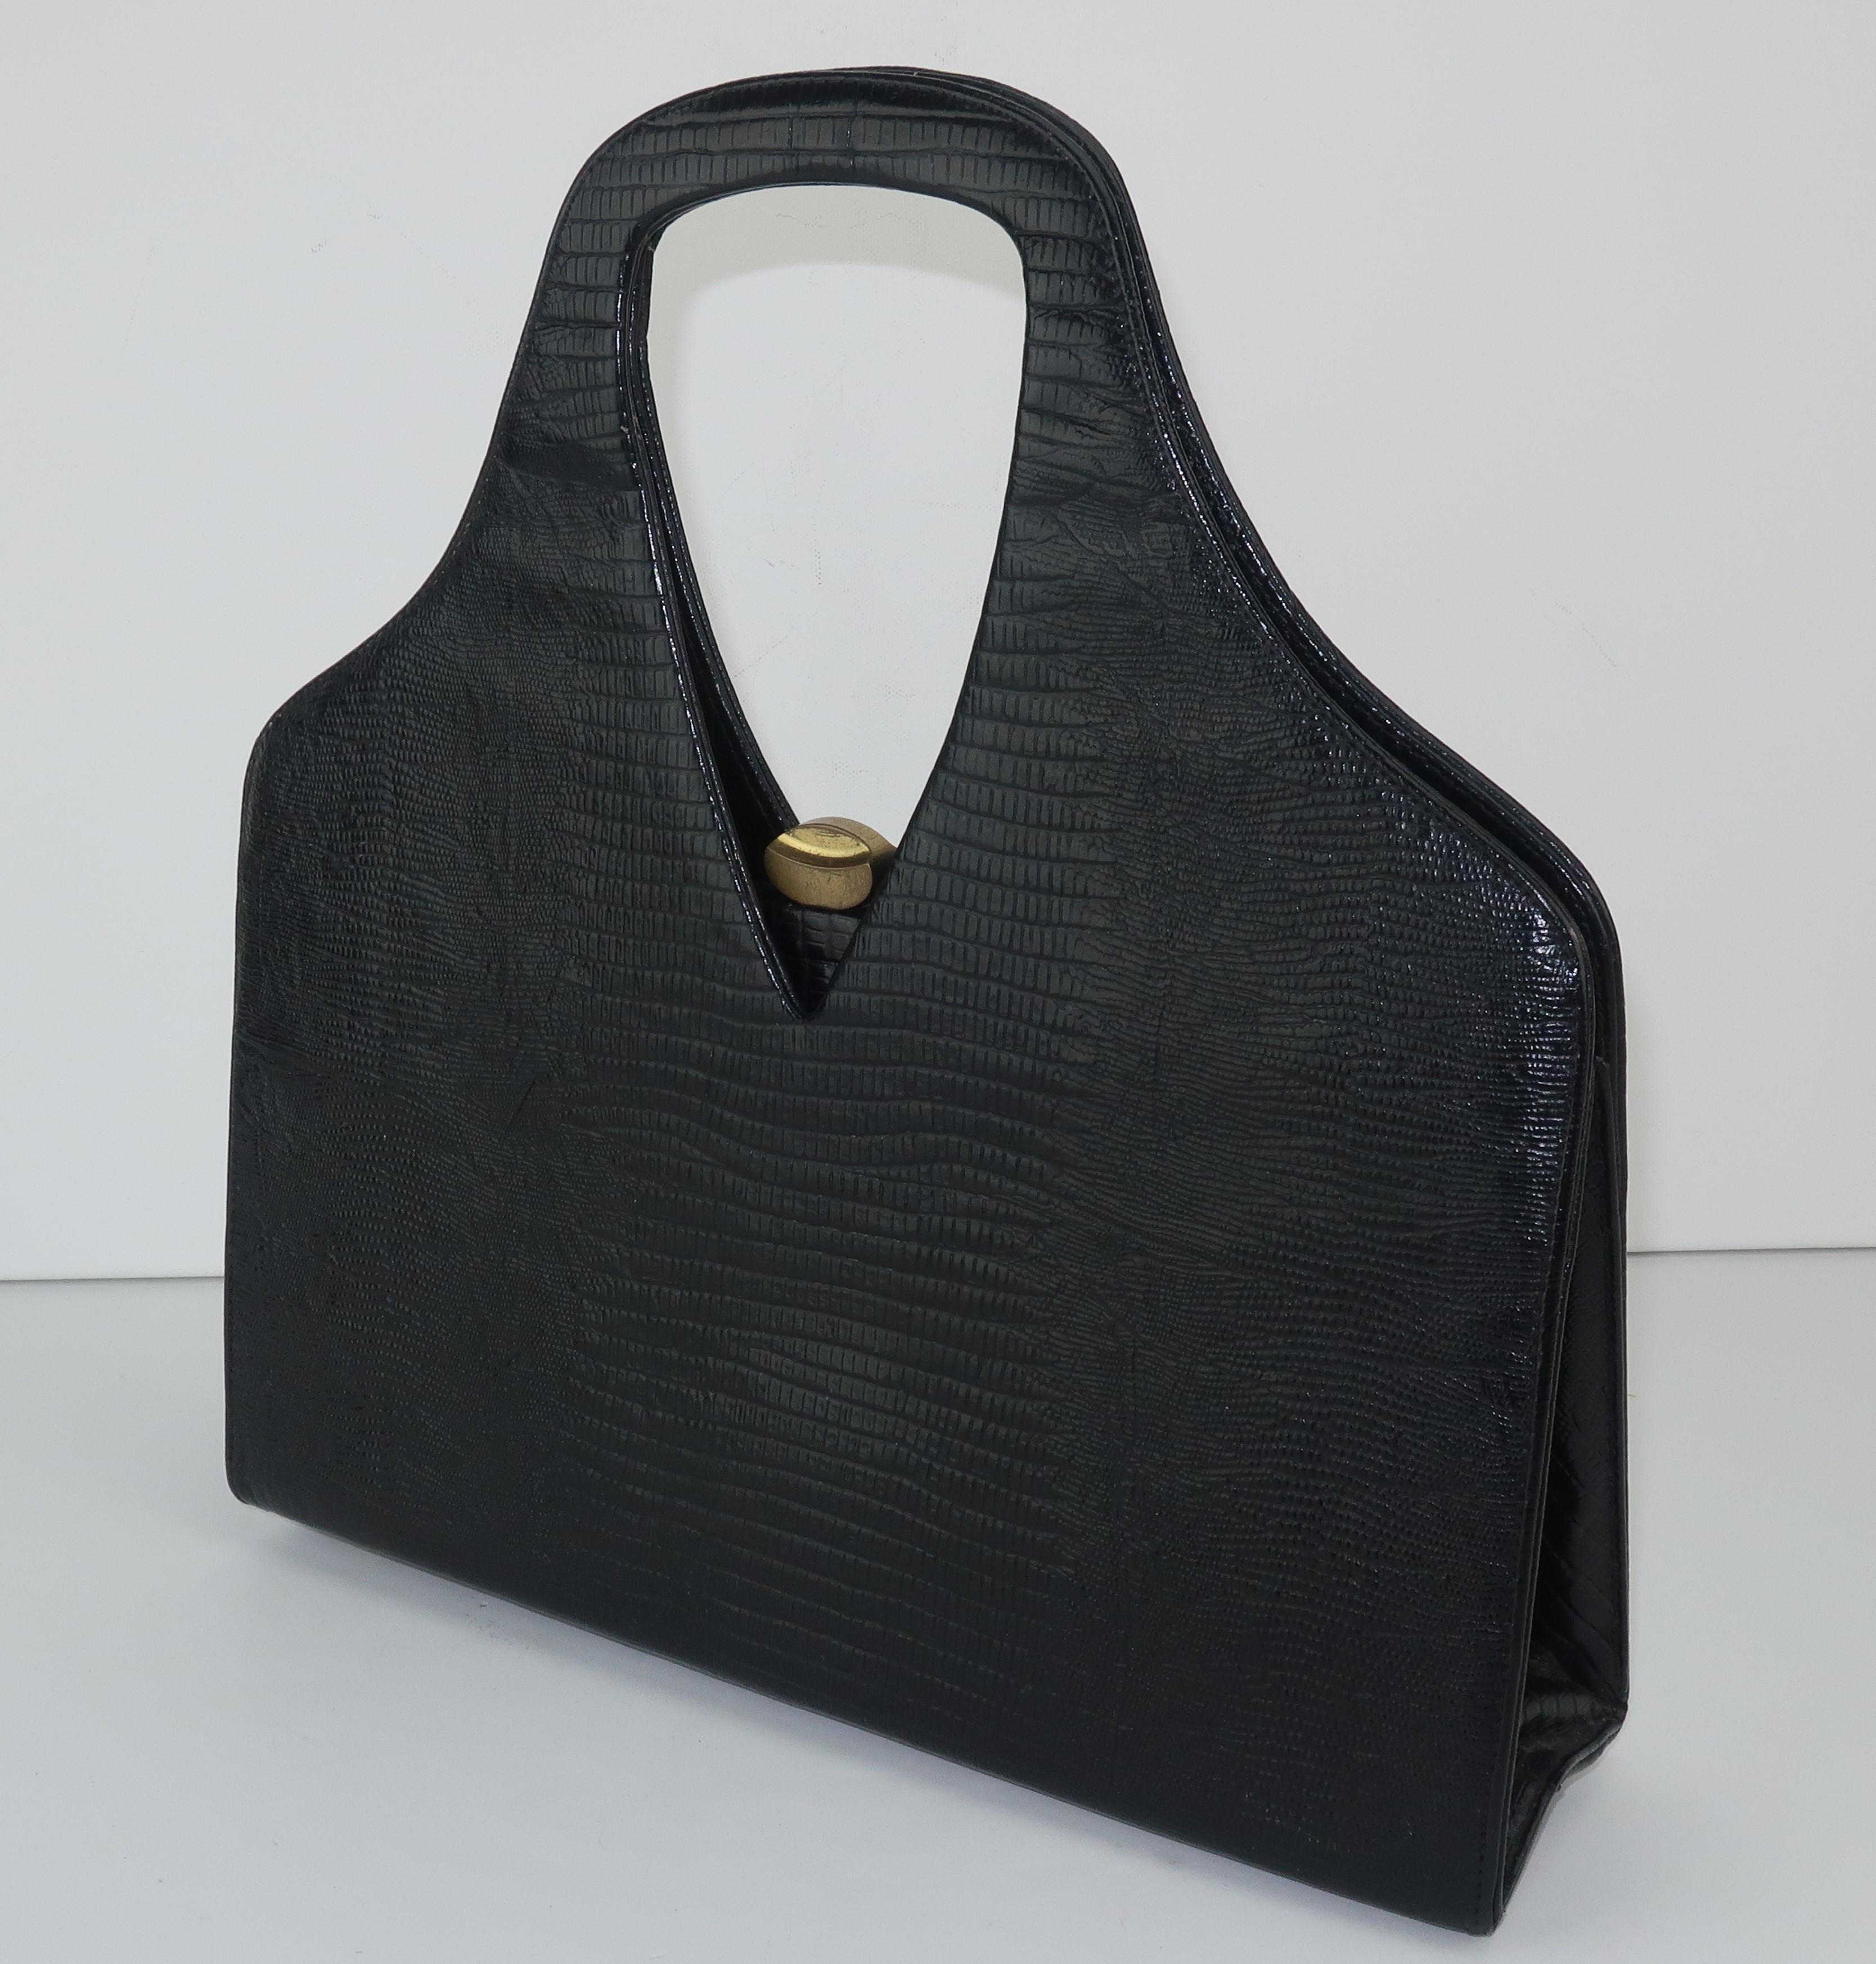 A 1950's black lizard skin handbag from Koro Creation with a unique top handle silhouette.  The push button brass closure opens to reveal a contrasting interior with two open side pockets and a matching mirror.  Brass feet at the base keeps this